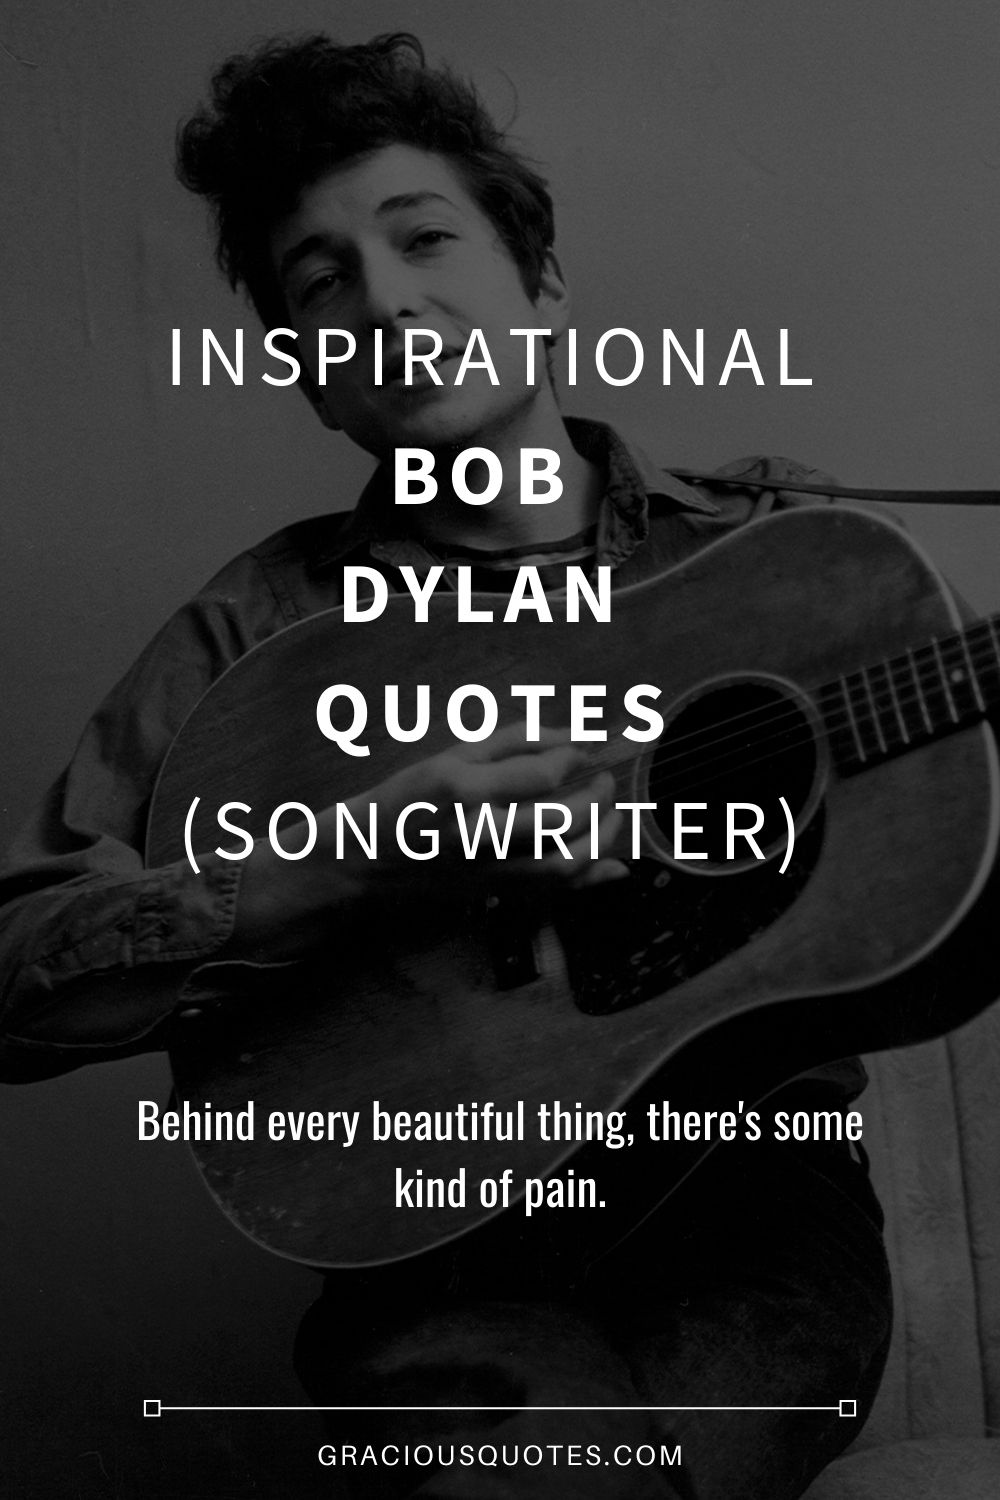 Inspirational Bob Dylan Quotes (SONGWRITER) - Gracious Quotes